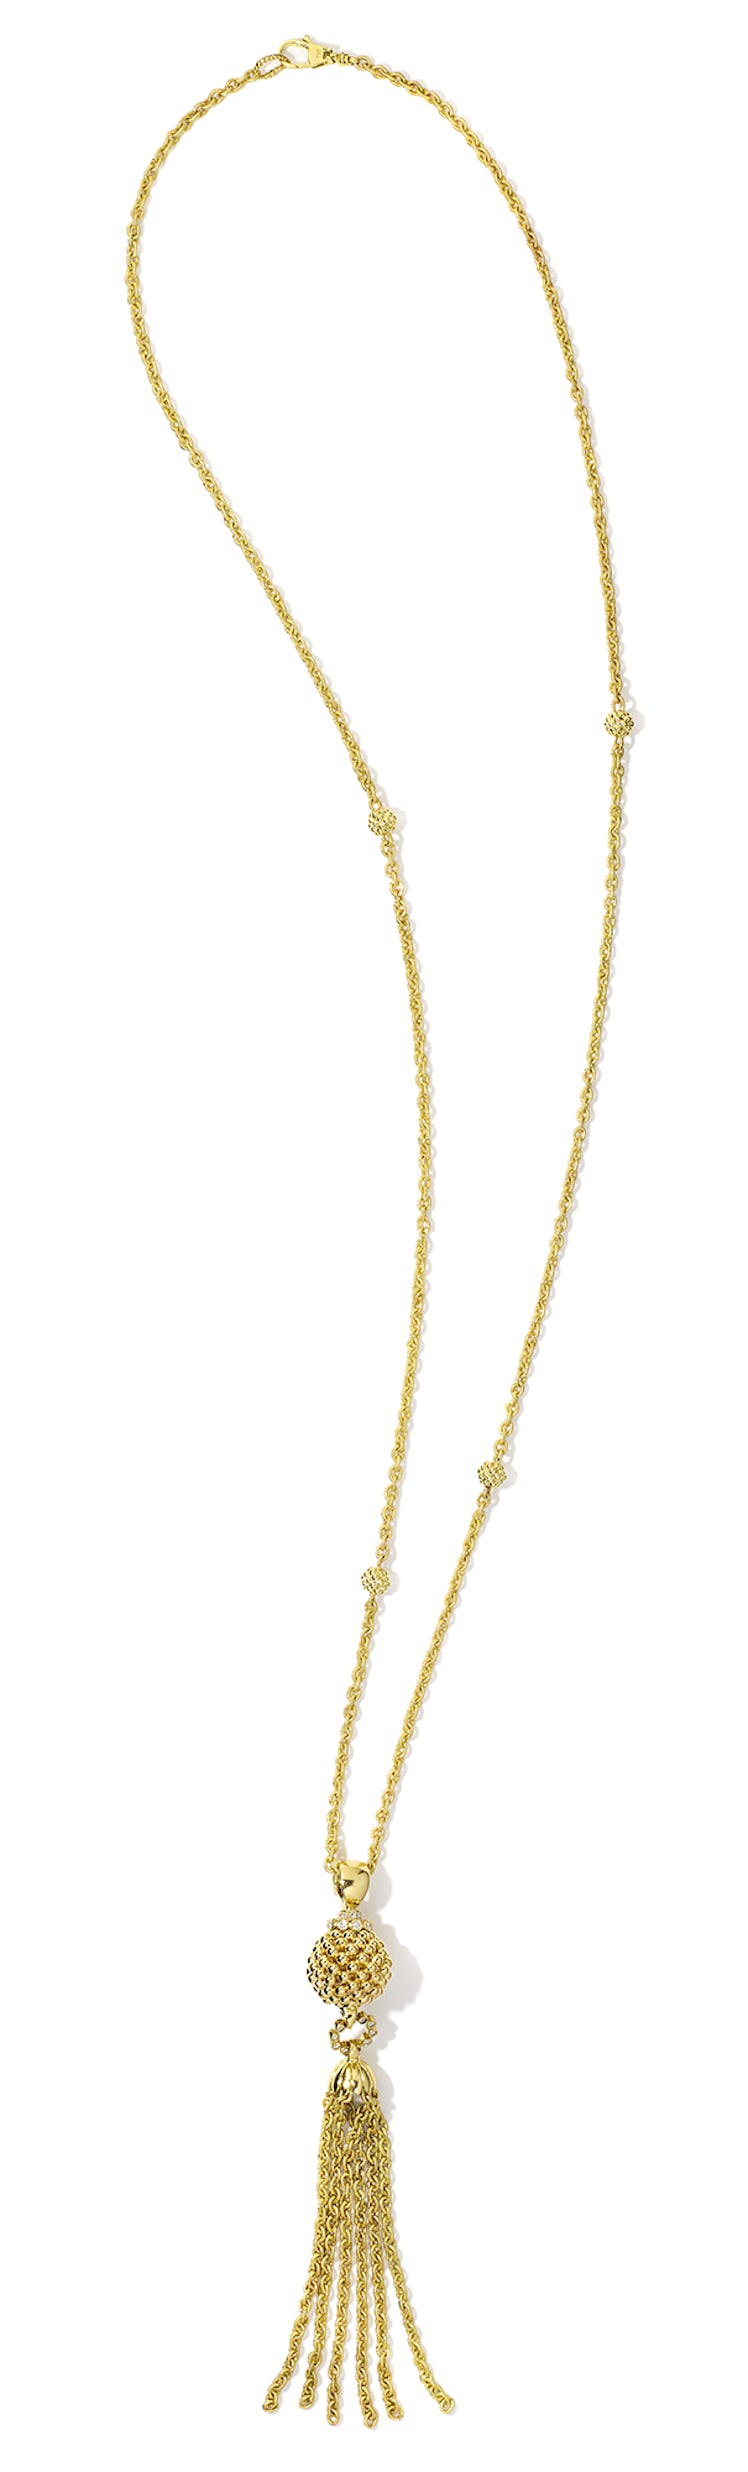 Lagos gold and diamond necklace